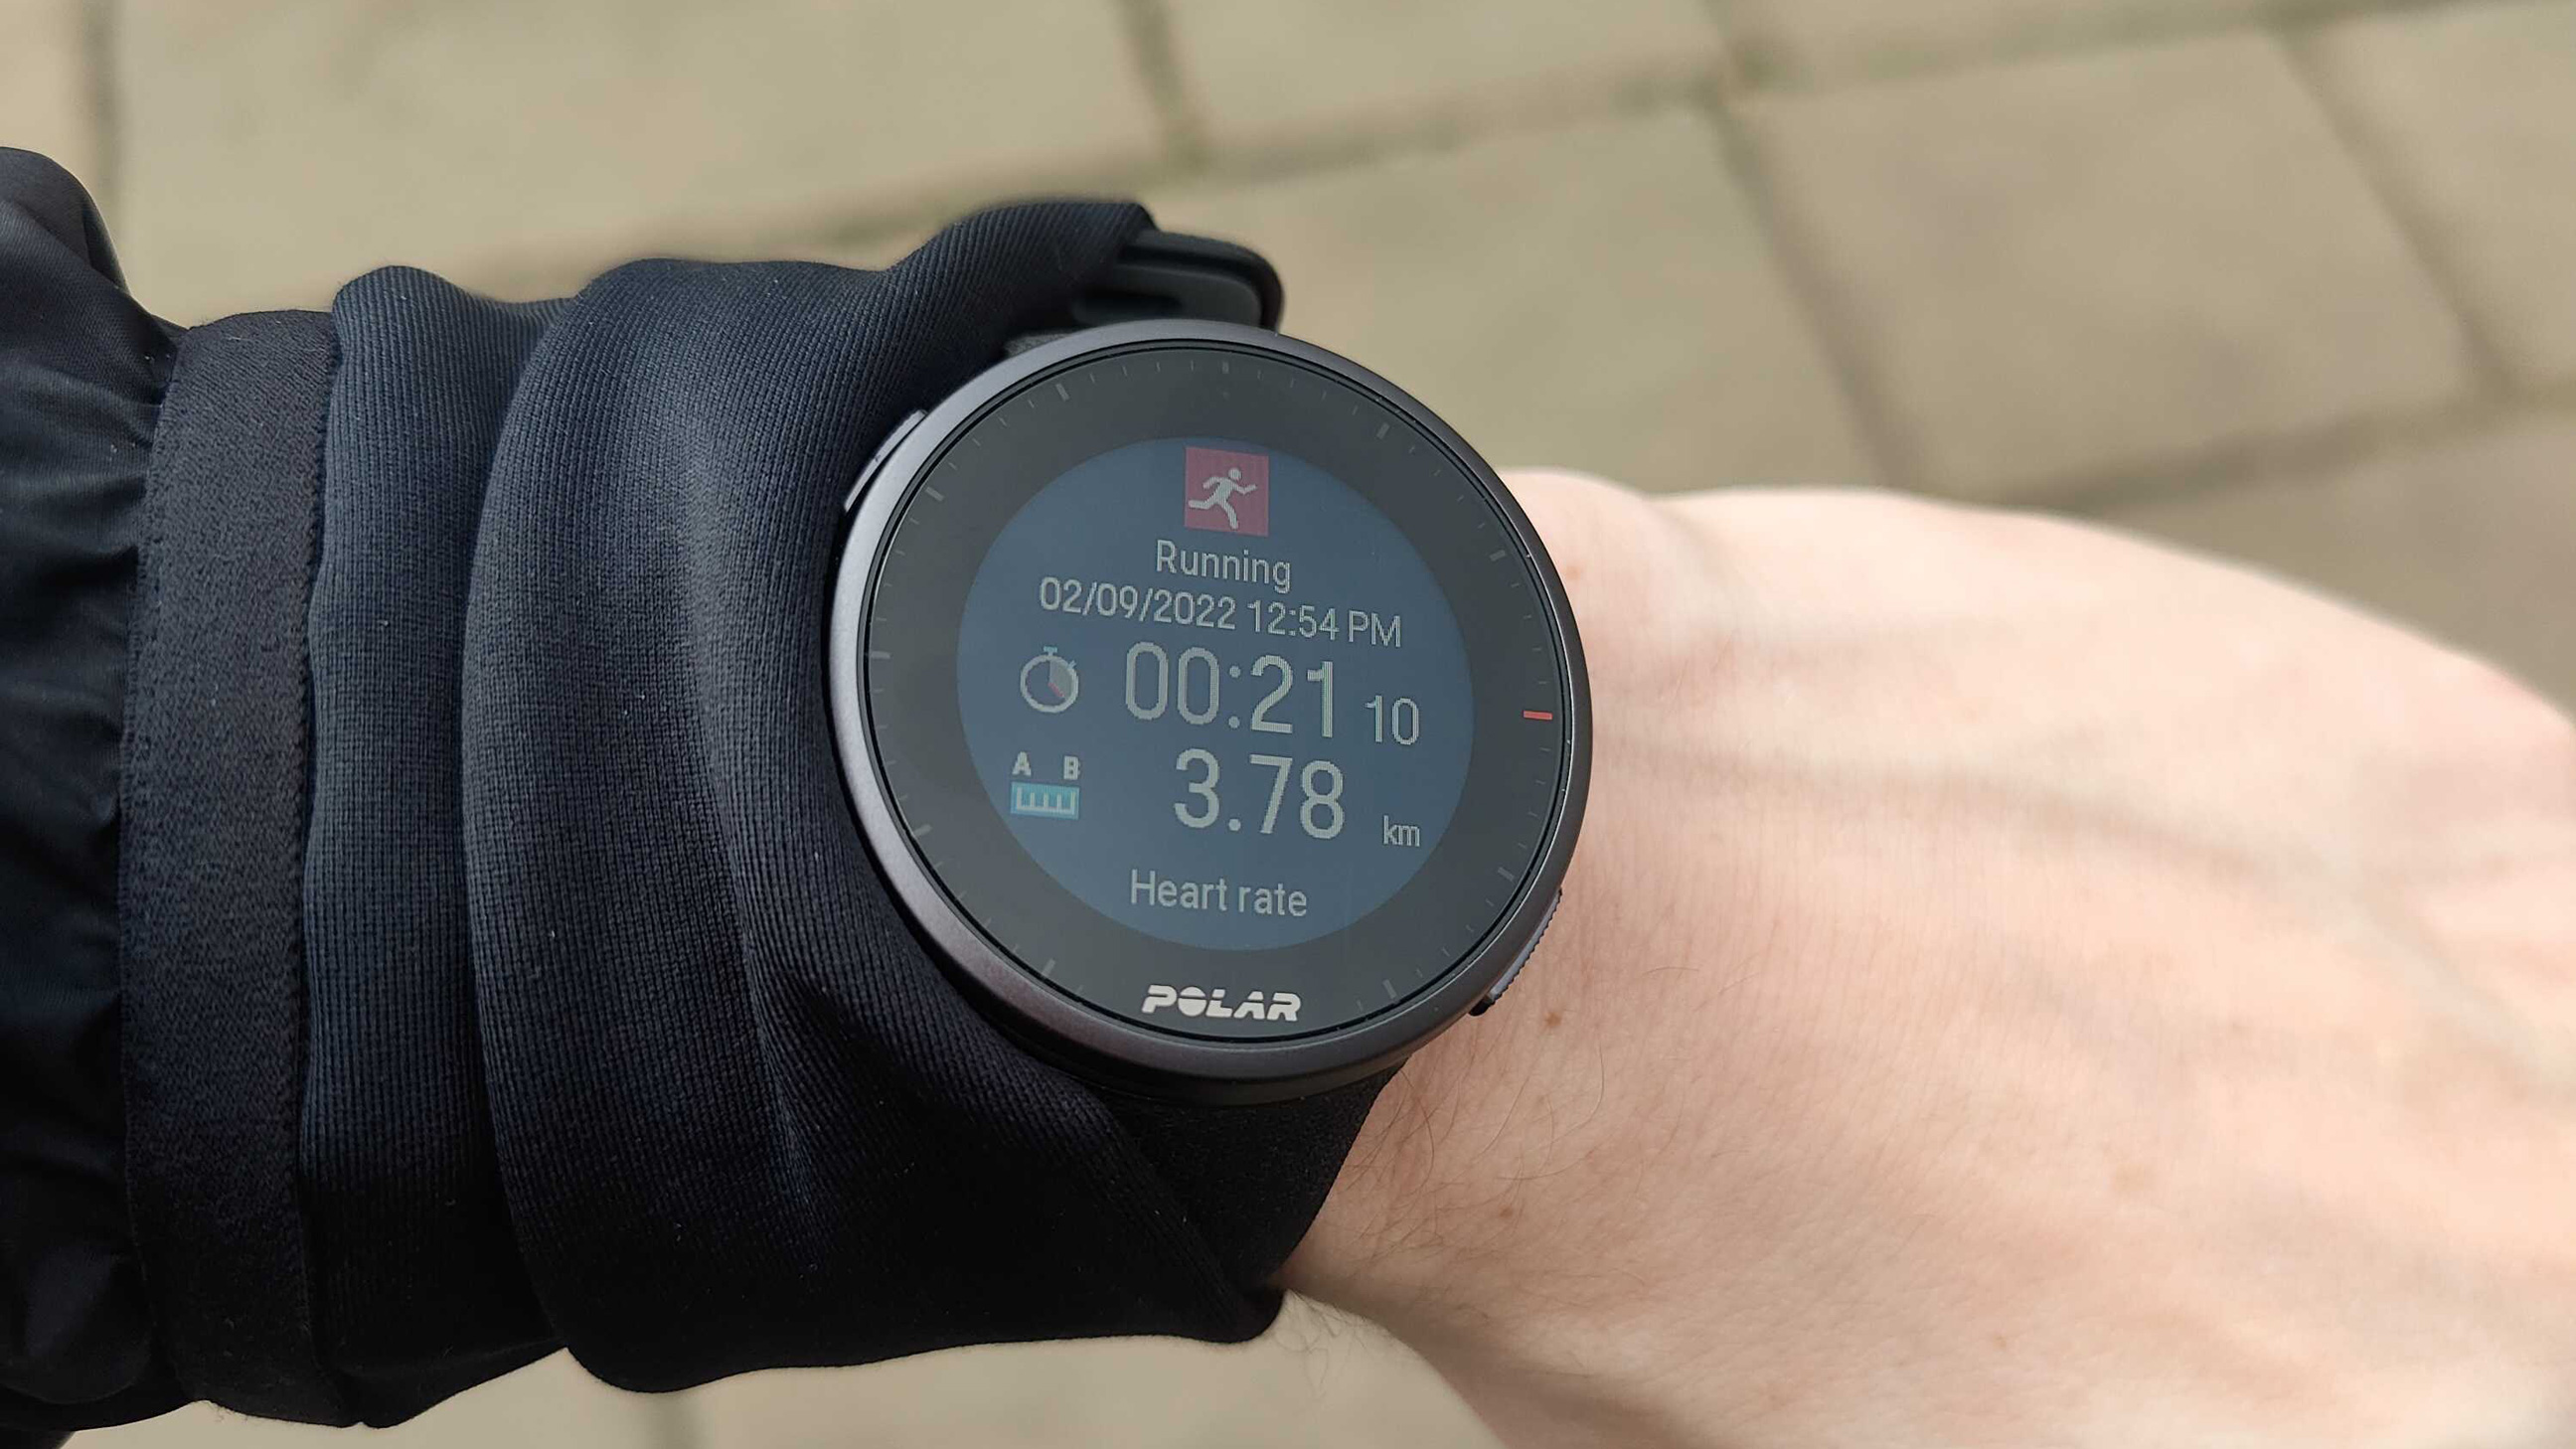 Polar Vantage V2 review: Our top running watch pick